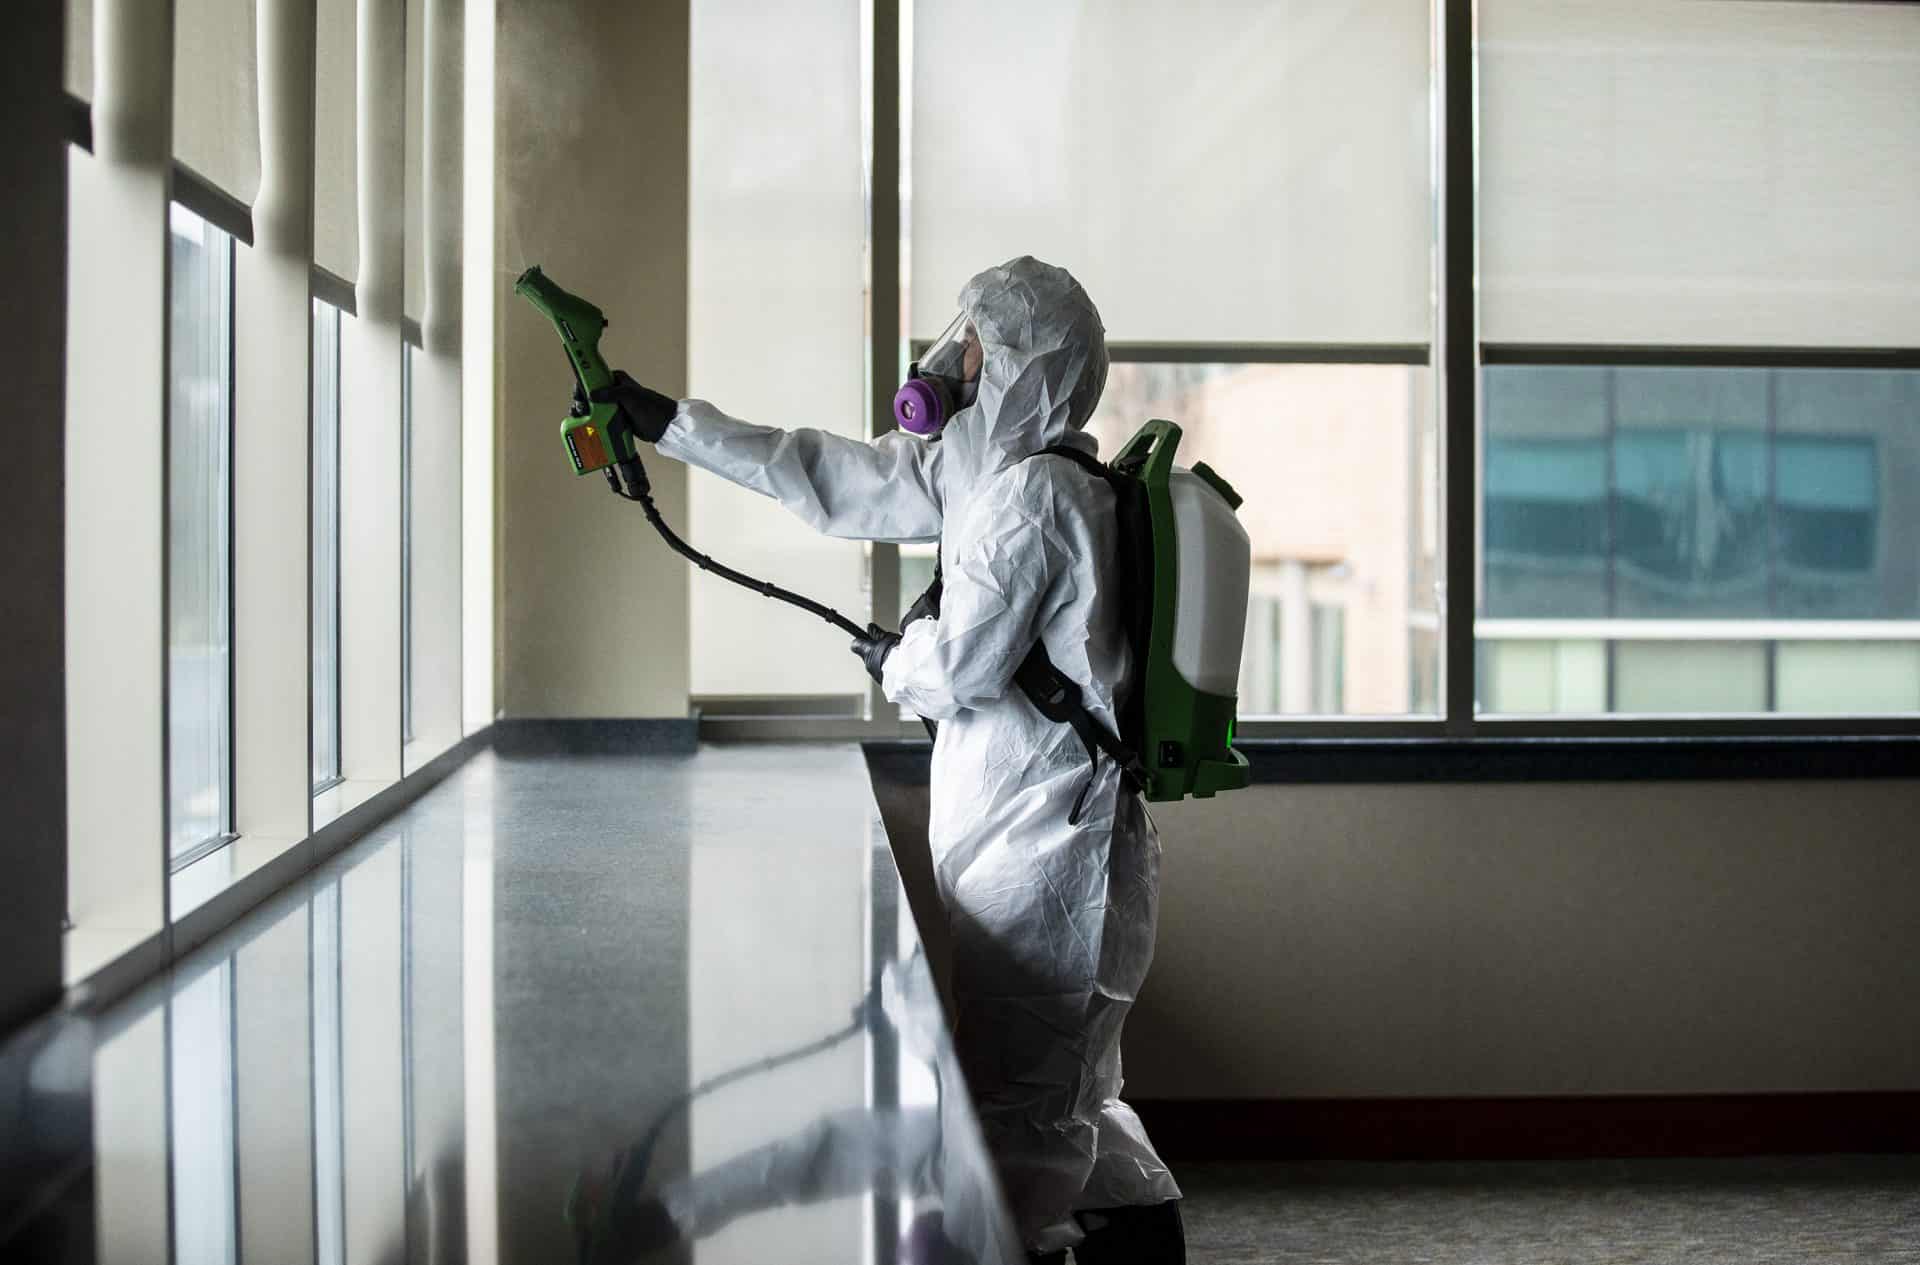 5 Reasons to Use COVID Disinfection Cleaning Services